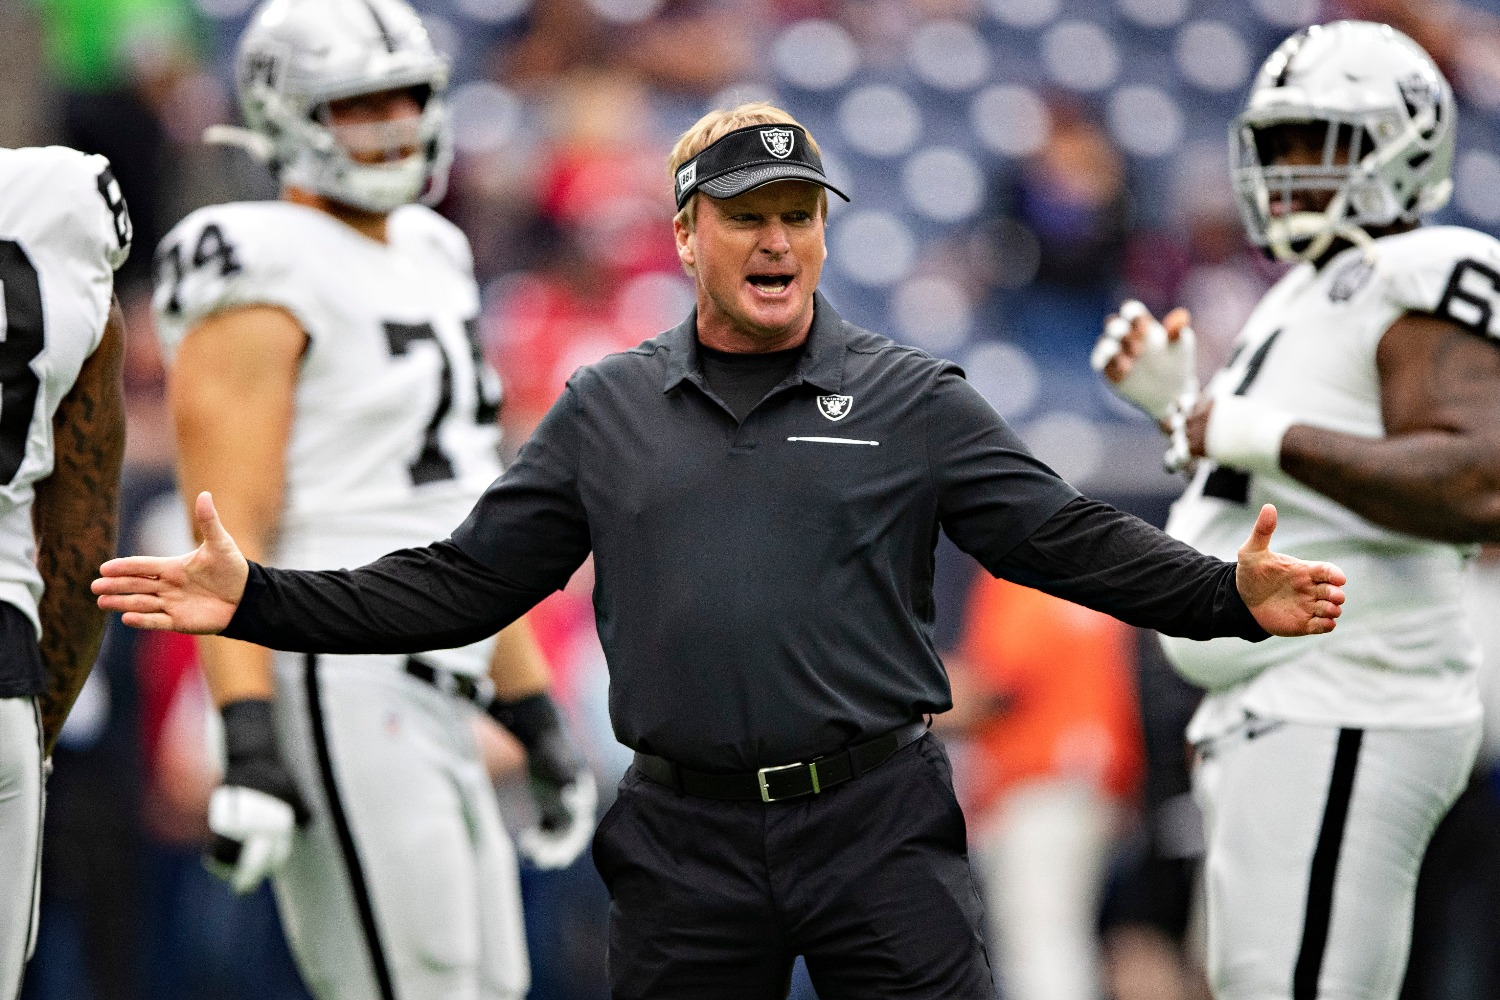 Jon Gruden Just Played a Sick COVID-19 Prank on His Own Players